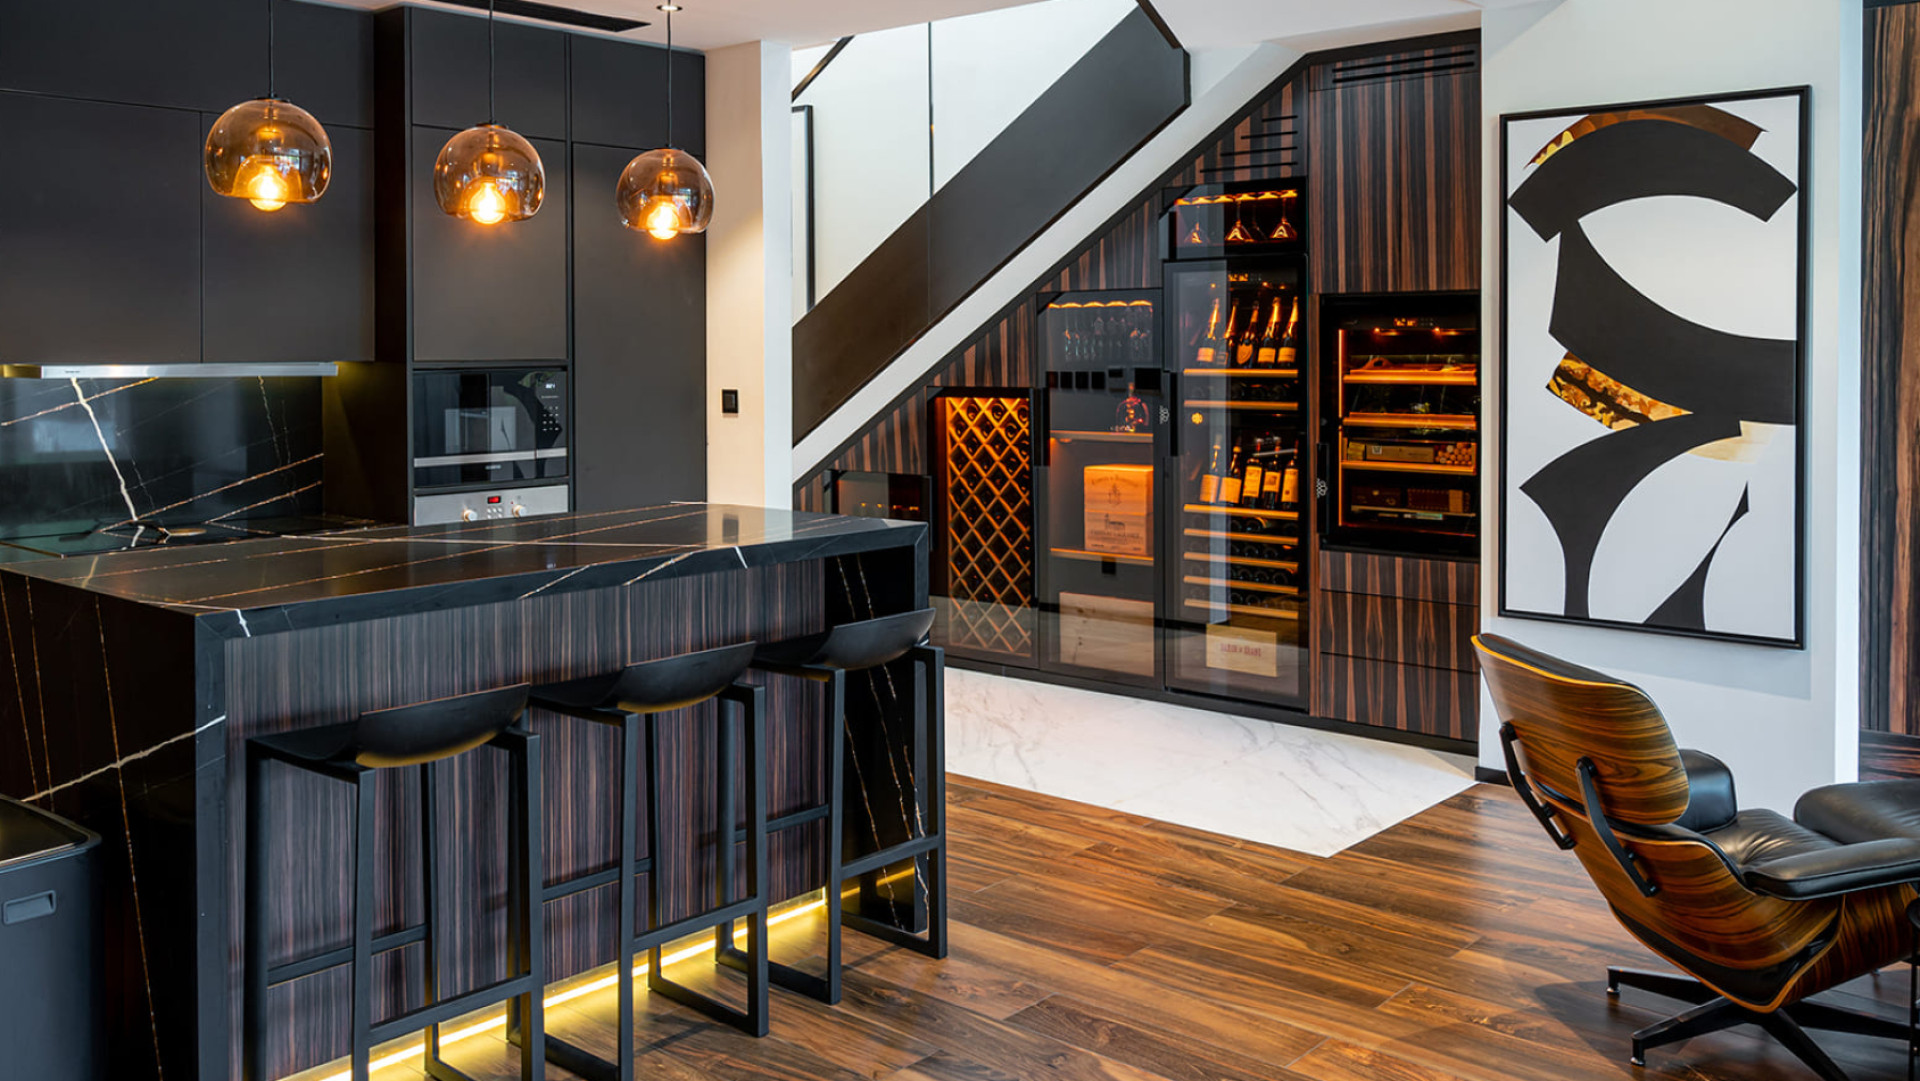 EuroCave air-conditioned freestanding wine cabinets can be built in to create a wine wall if you follow a few recommendations.